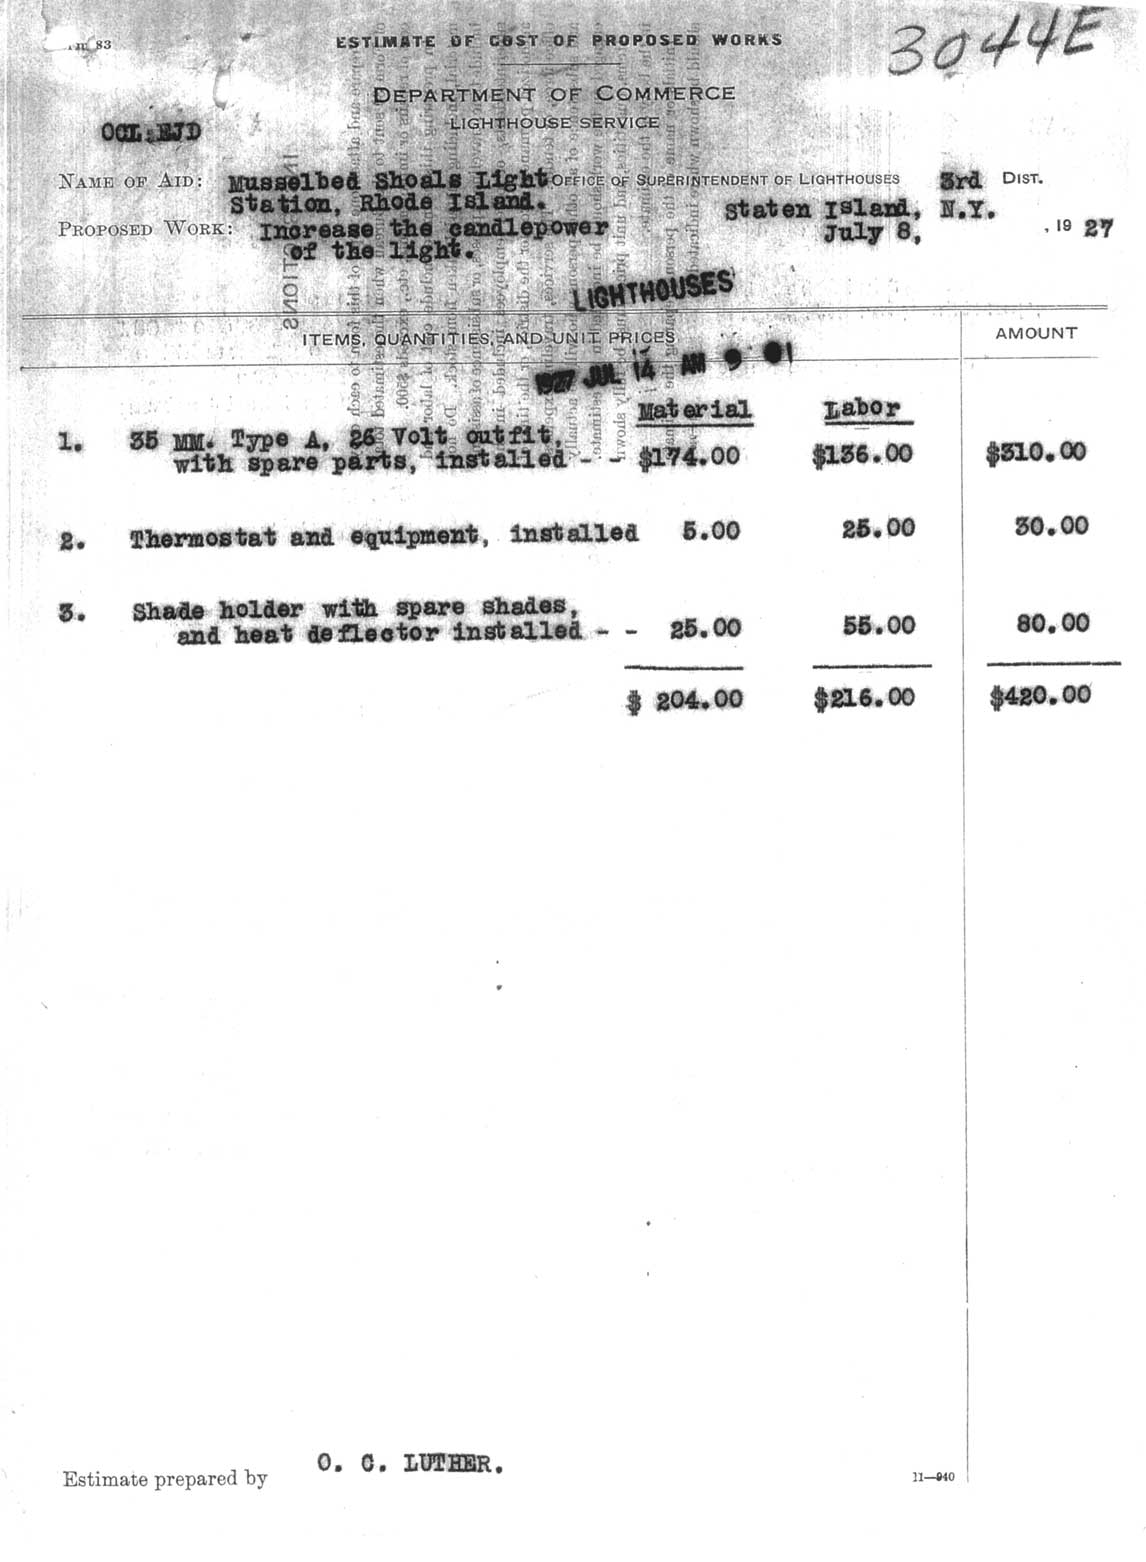 Estimate Of Cost Of Proposed Works at Musselbed Shoals Light